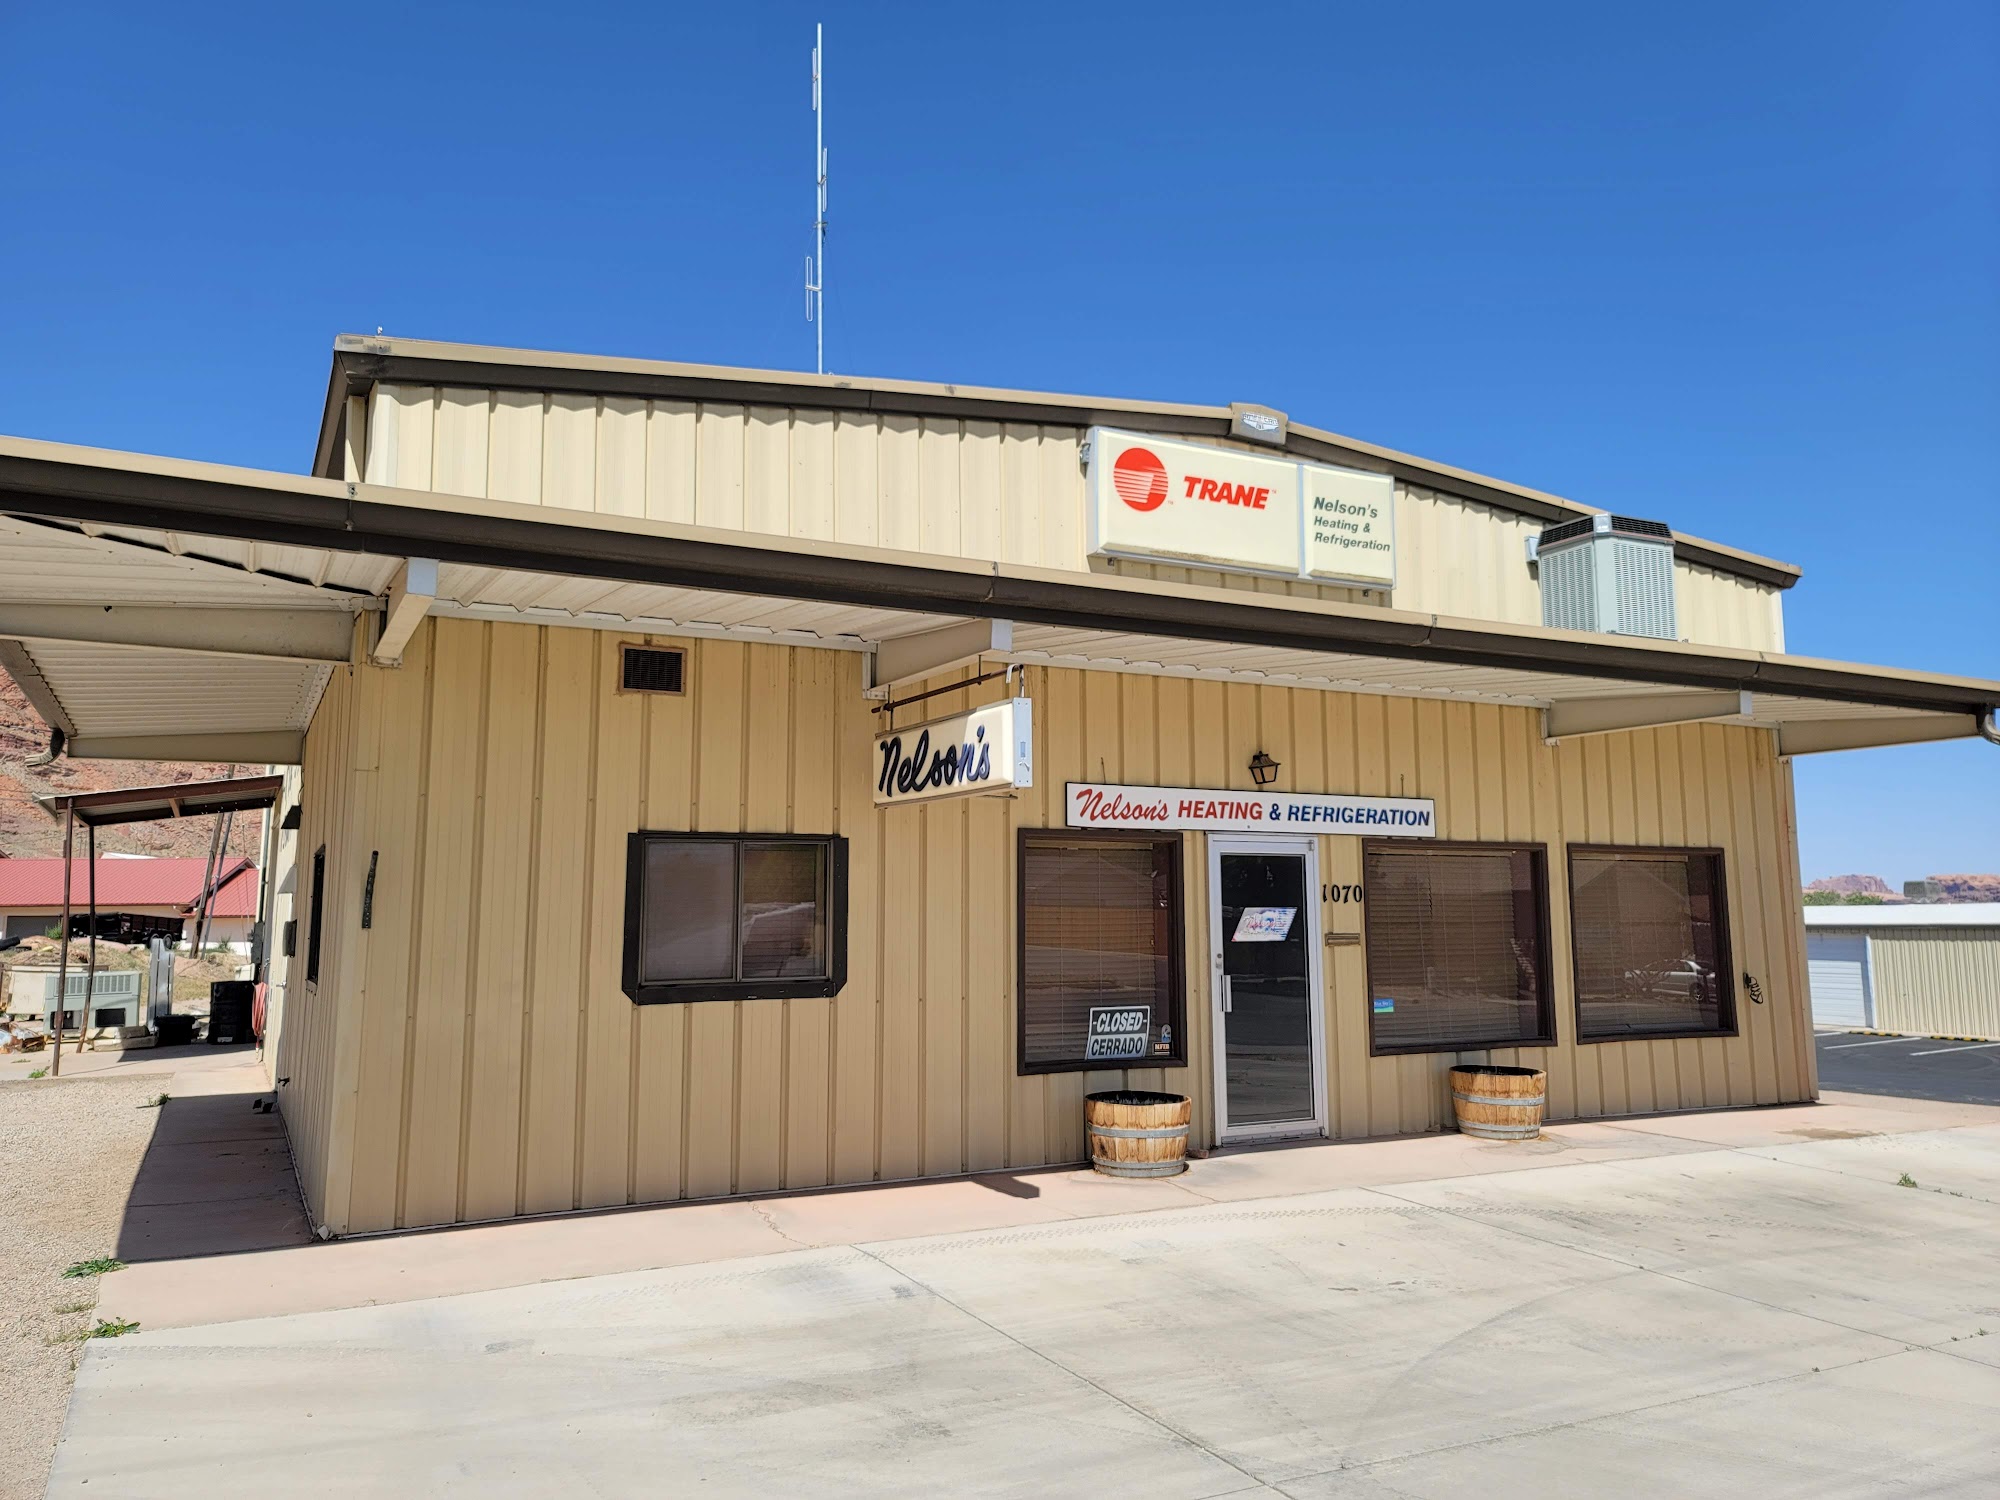 Nelson's Heating & Refrigeration 1070 Bowling Alley Ln, Moab Utah 84532